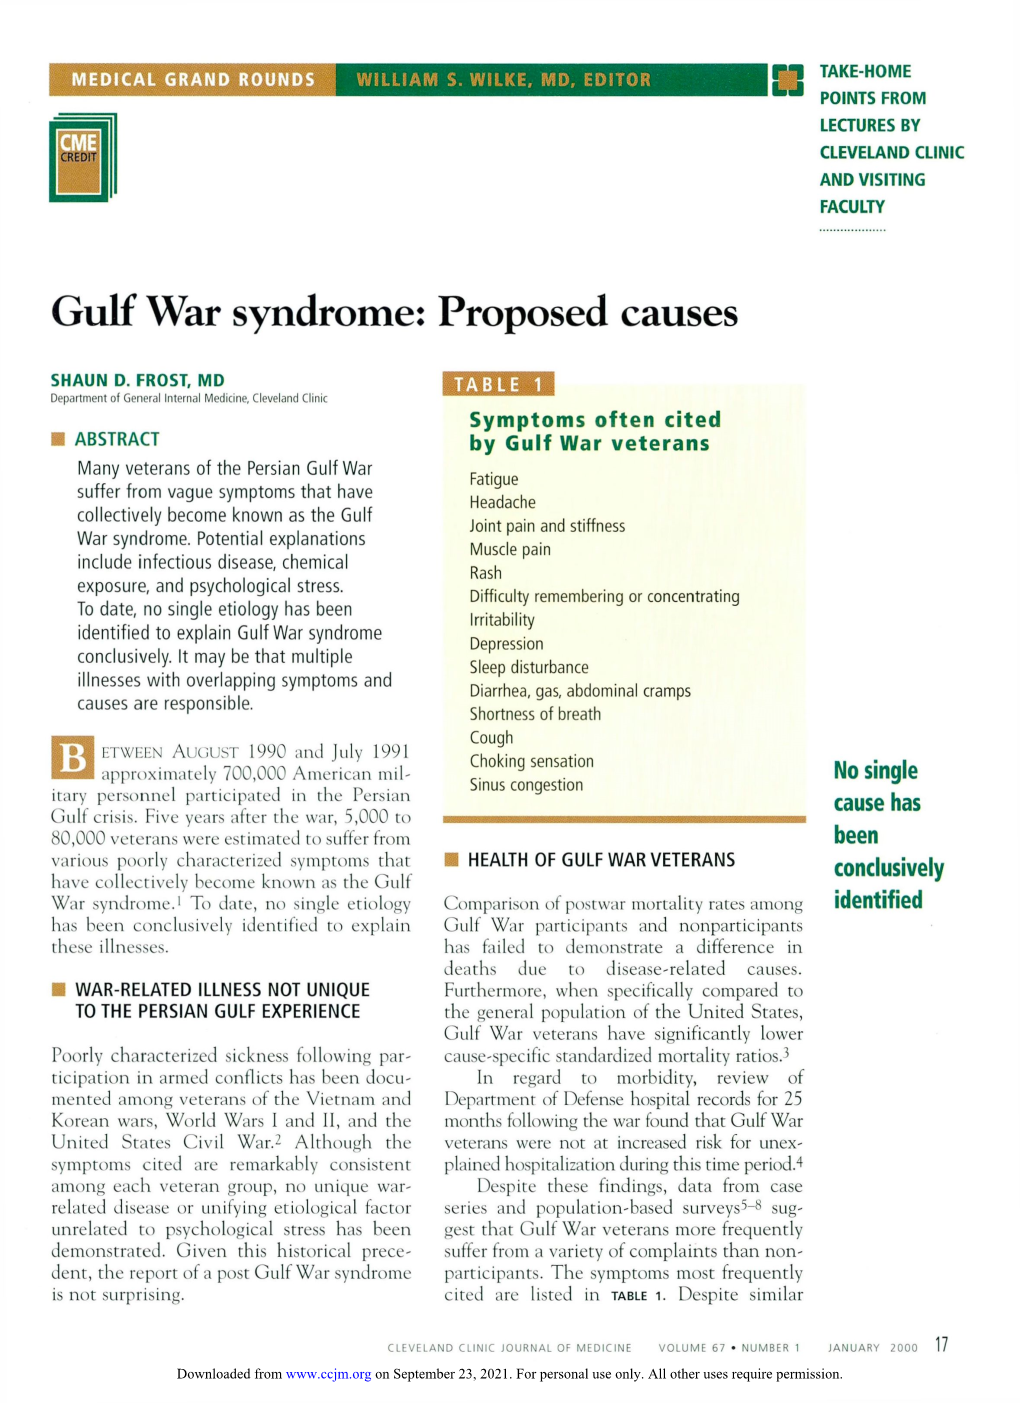 Gulf War Syndrome: Proposed Causes